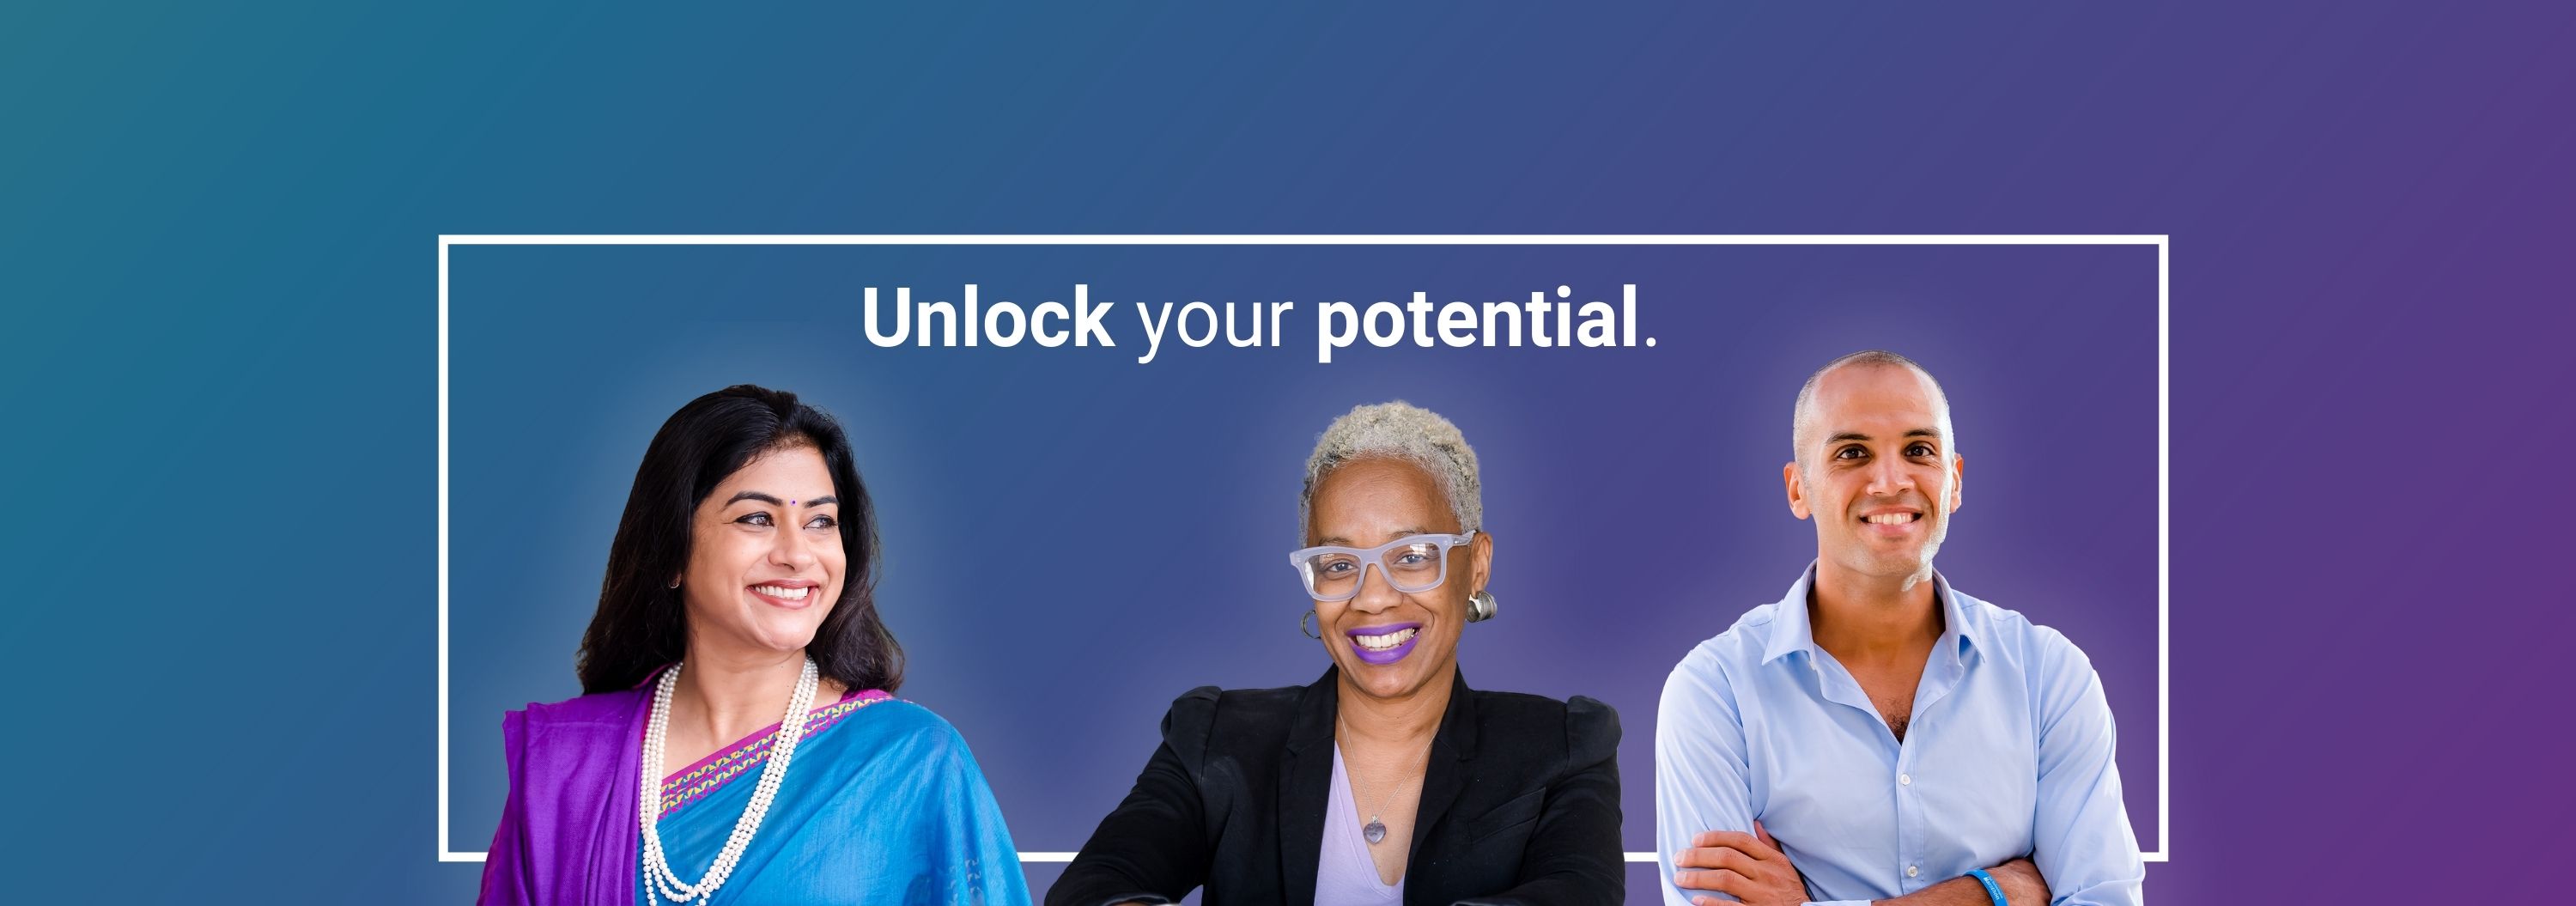 Unlock your potential. 3 people smiling